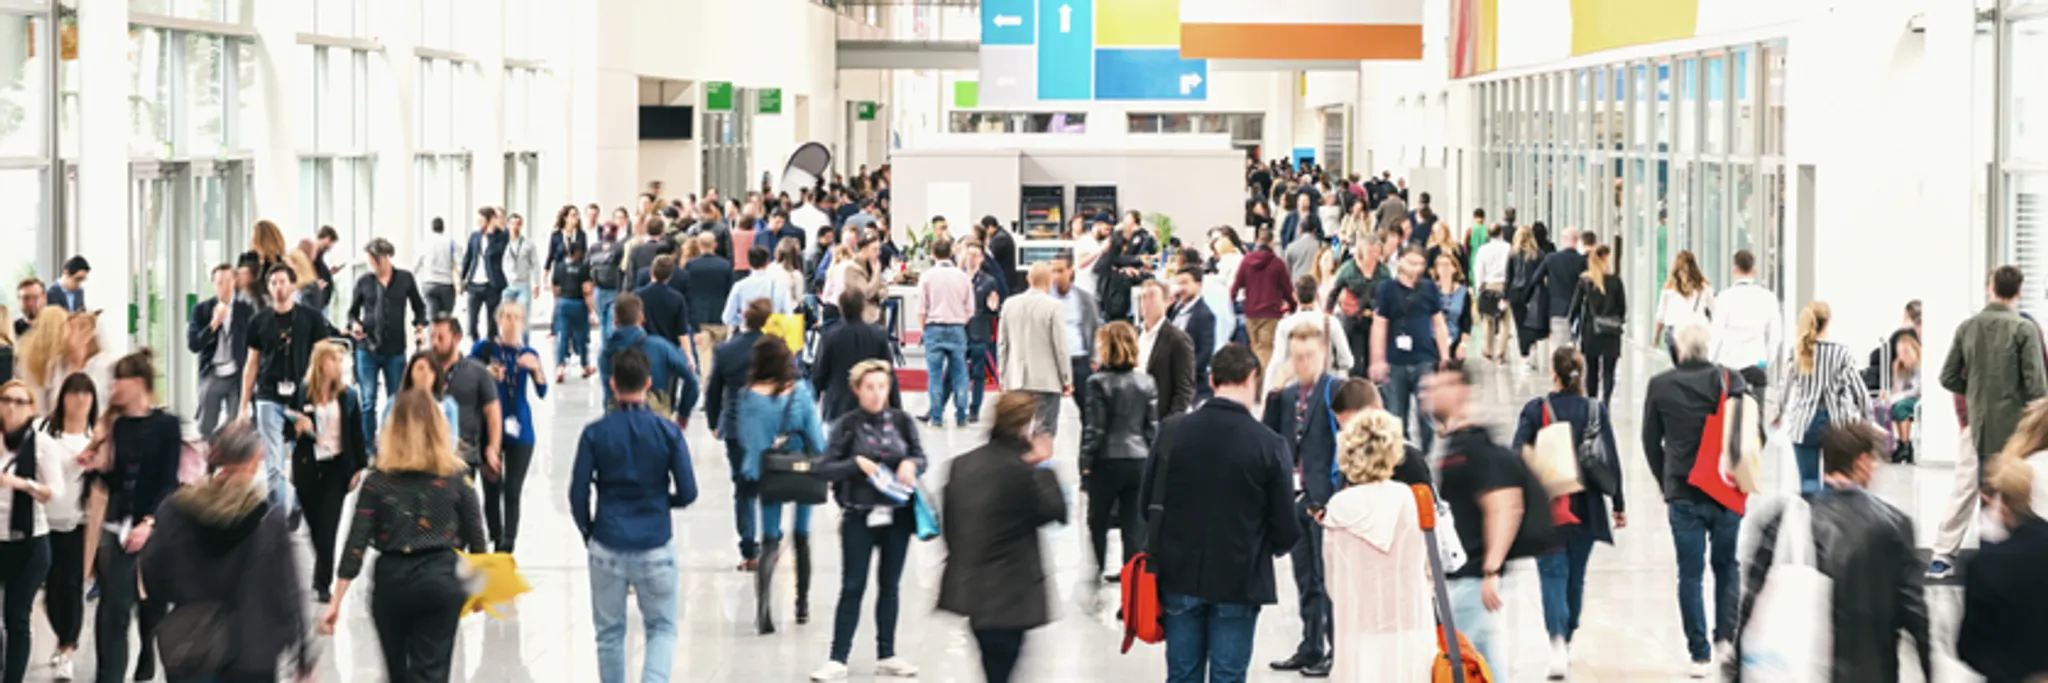 Top 10 Tips for First-Time Trade Show Exhibitors